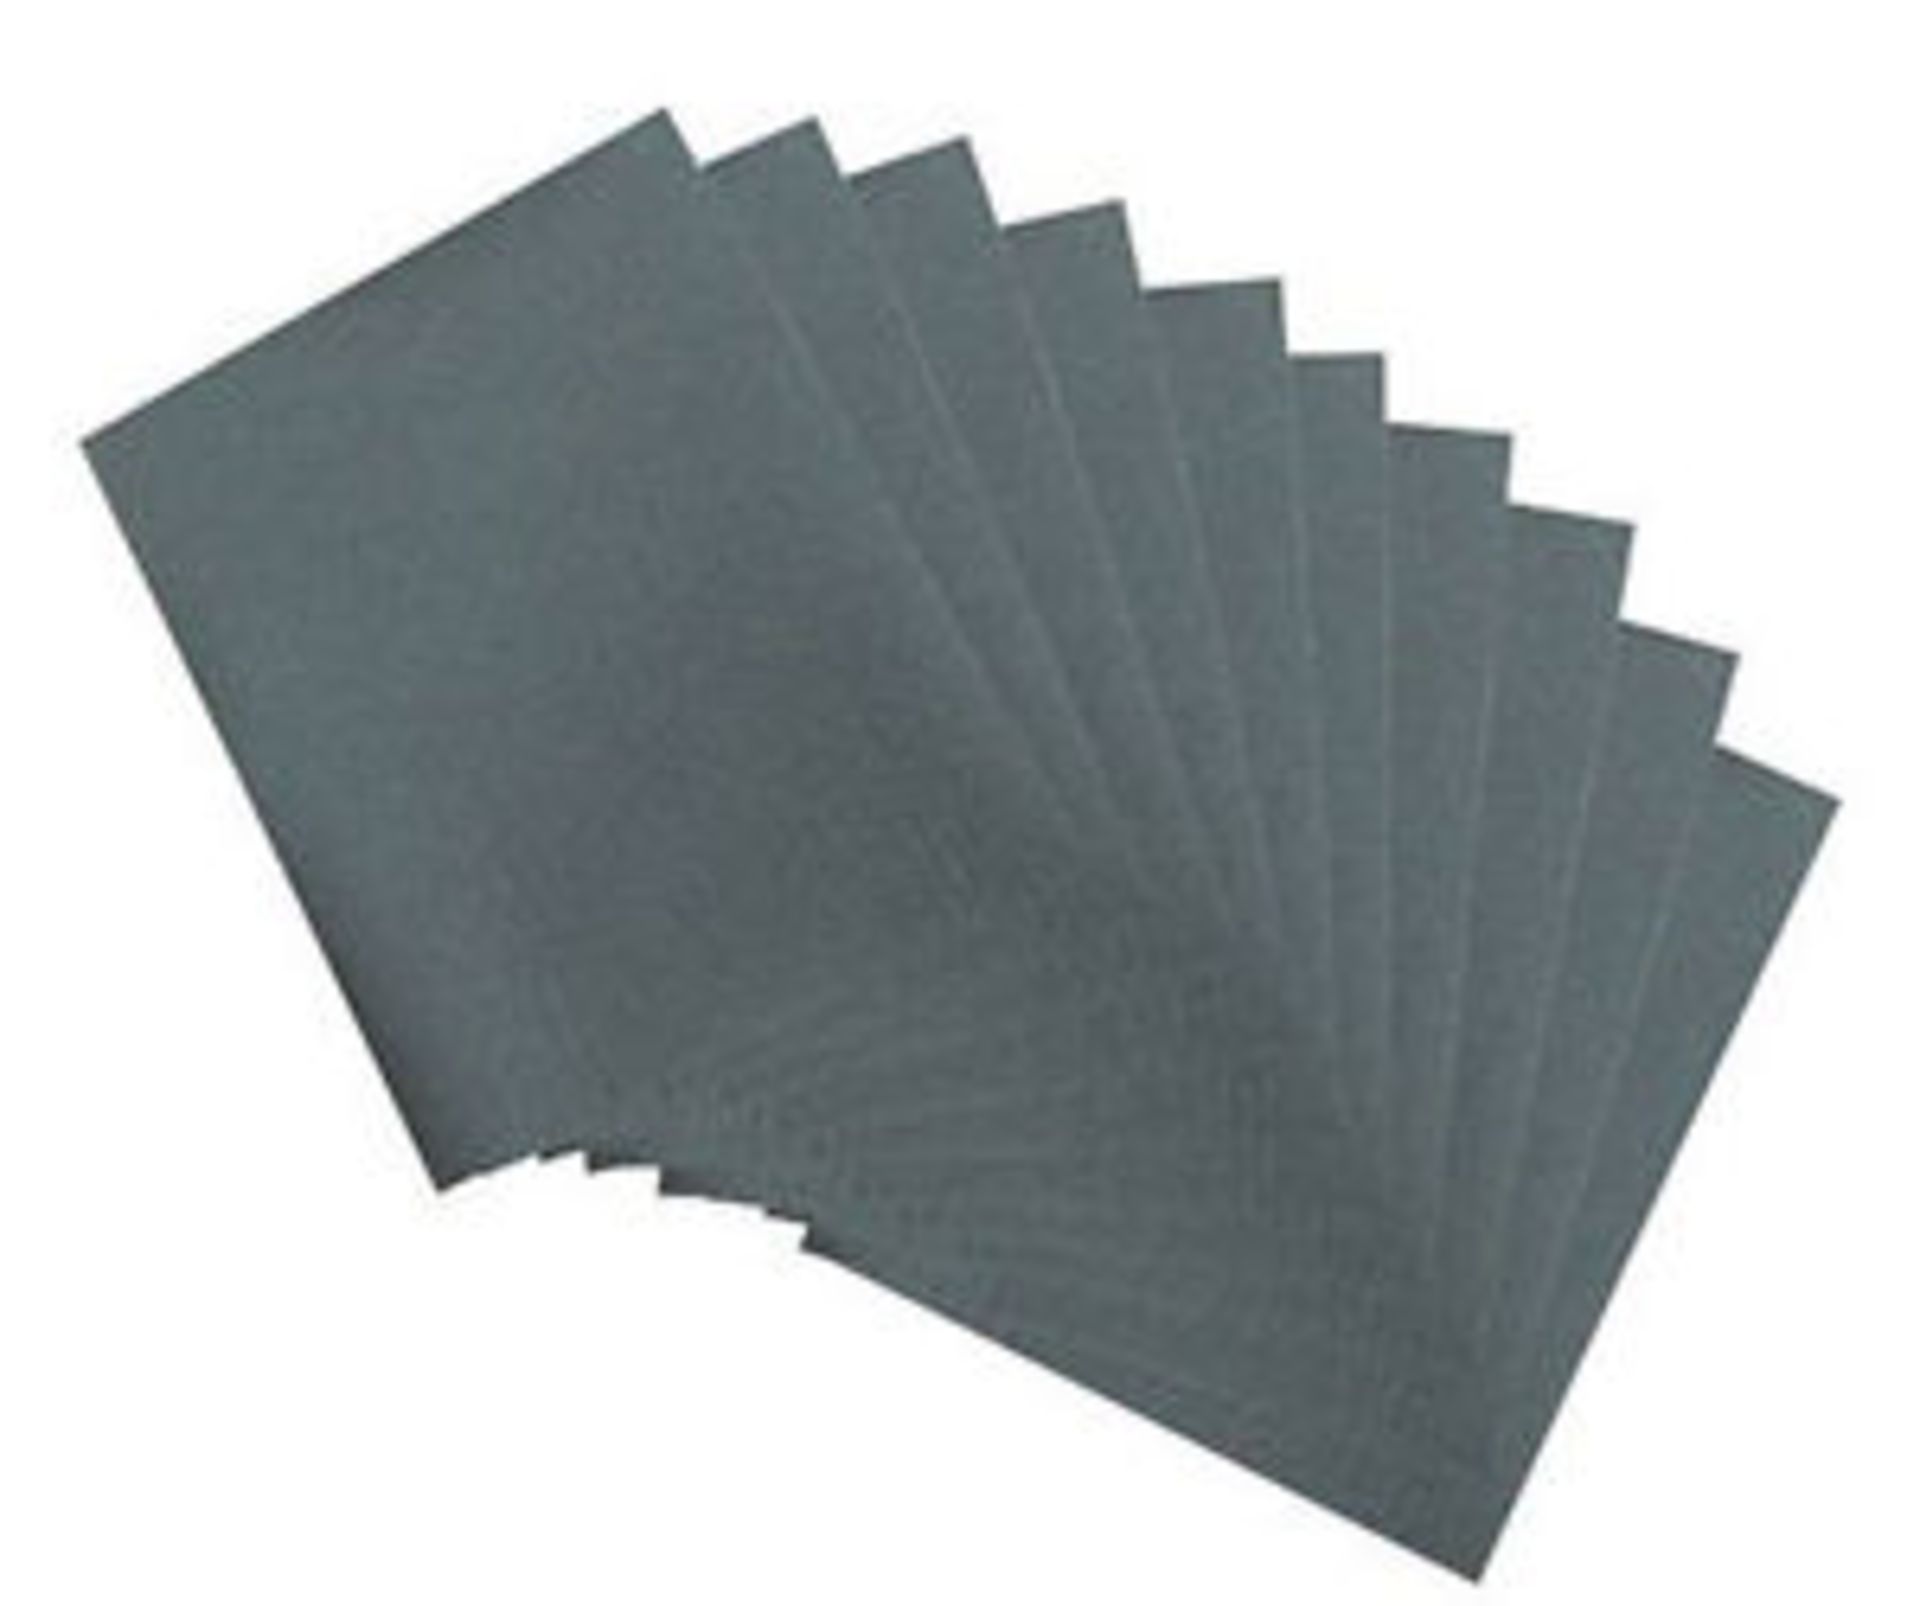 20 BRAND NEW SHEETS OF 180 GRIT EMERY PAPER